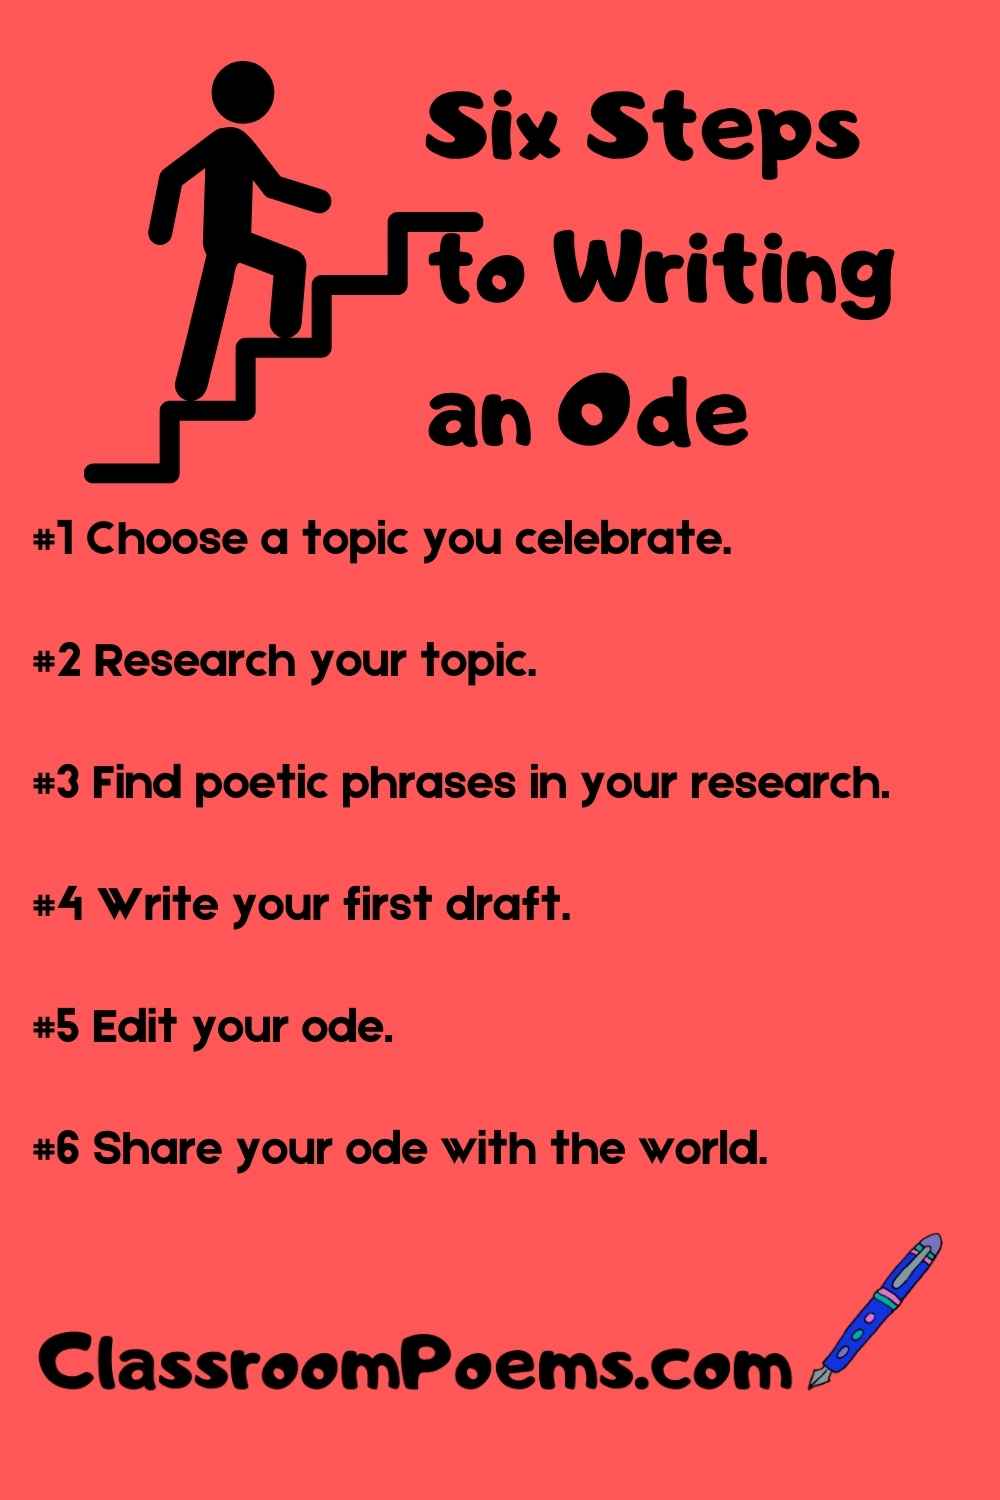 How to write an ode in six easy steps. Perfect for students and teachers of poetry.